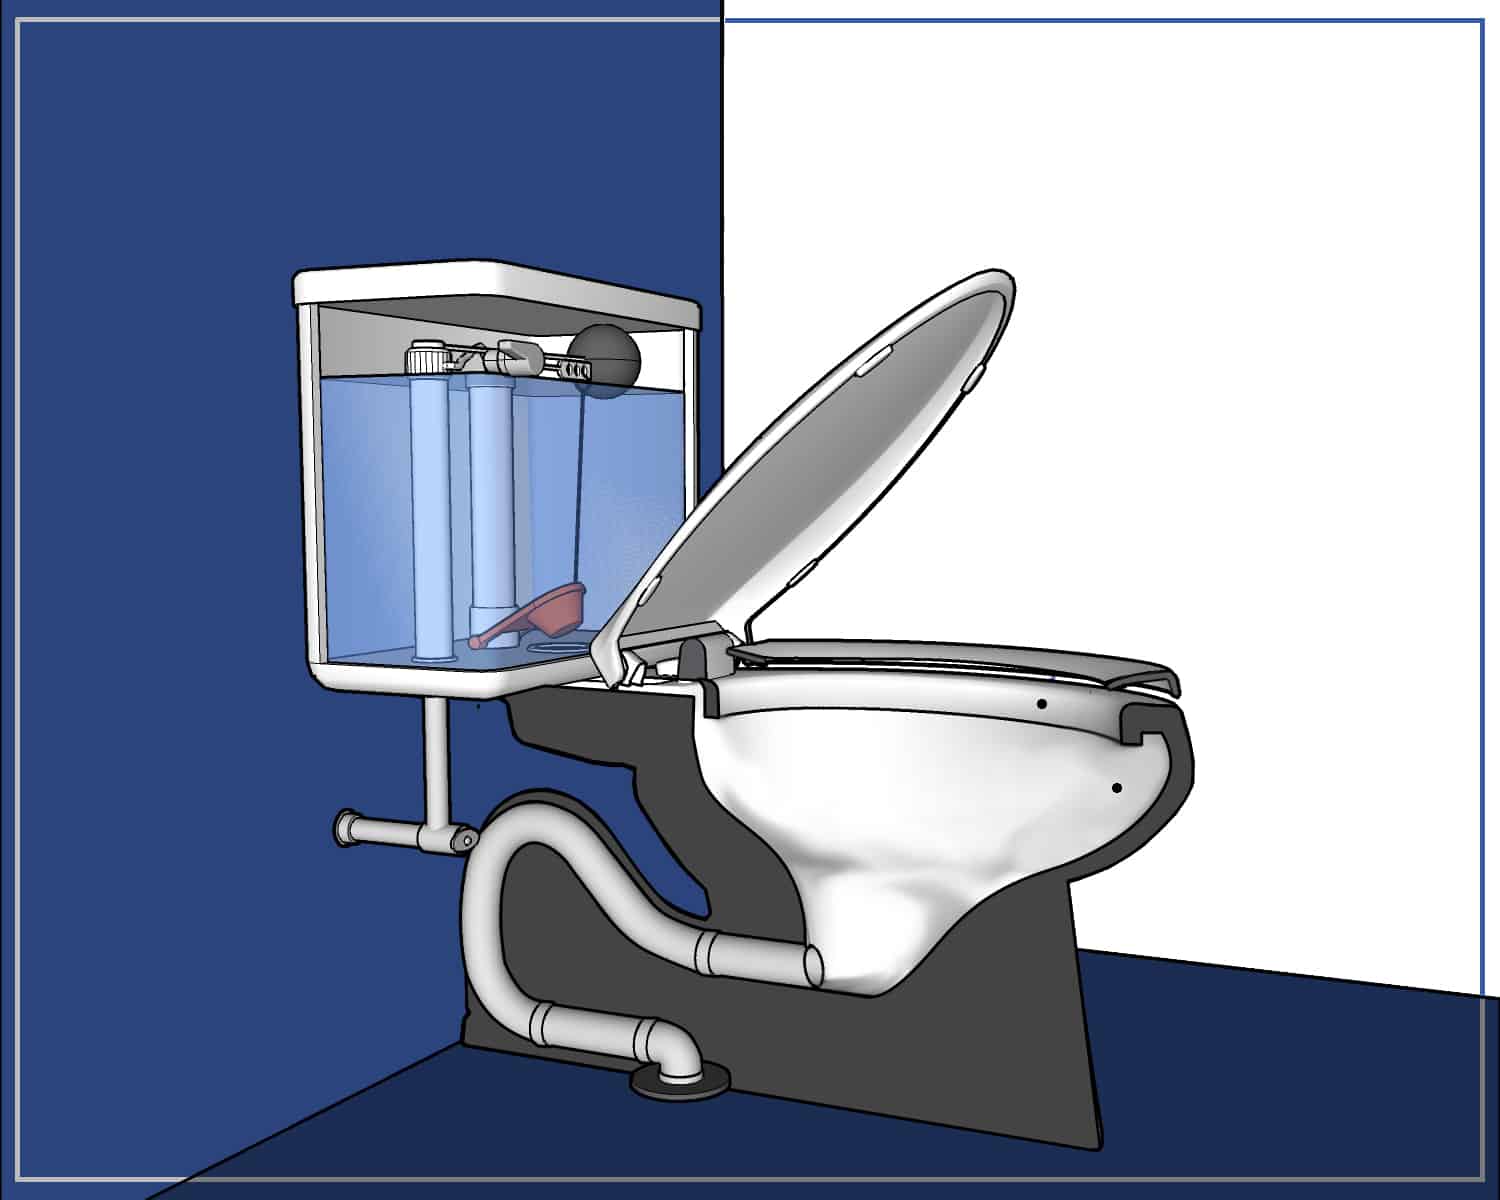 Parts of a toilet explained